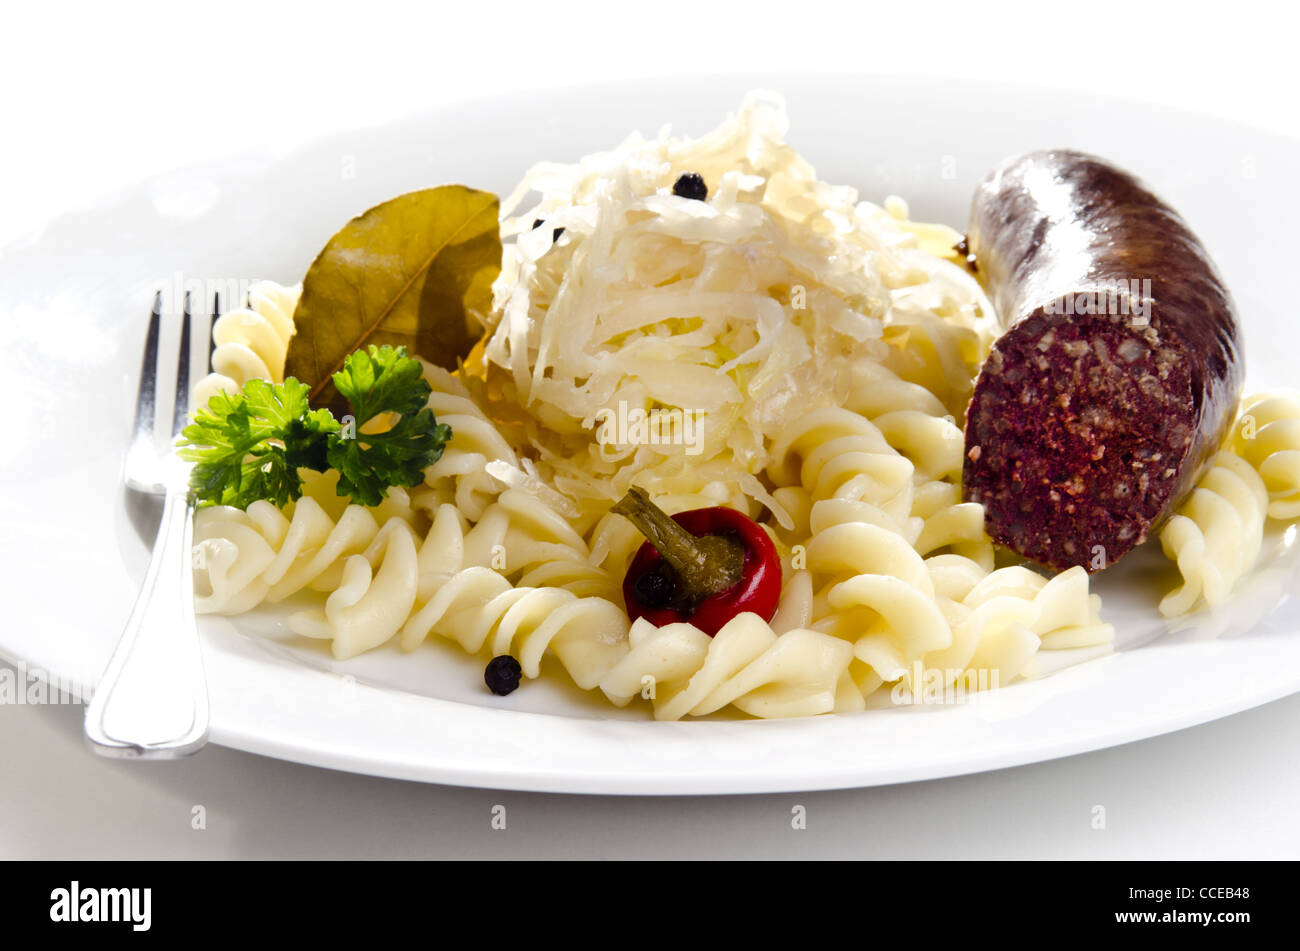 Sauerkraut with noodle and home made sausage on a white plate Stock Photo